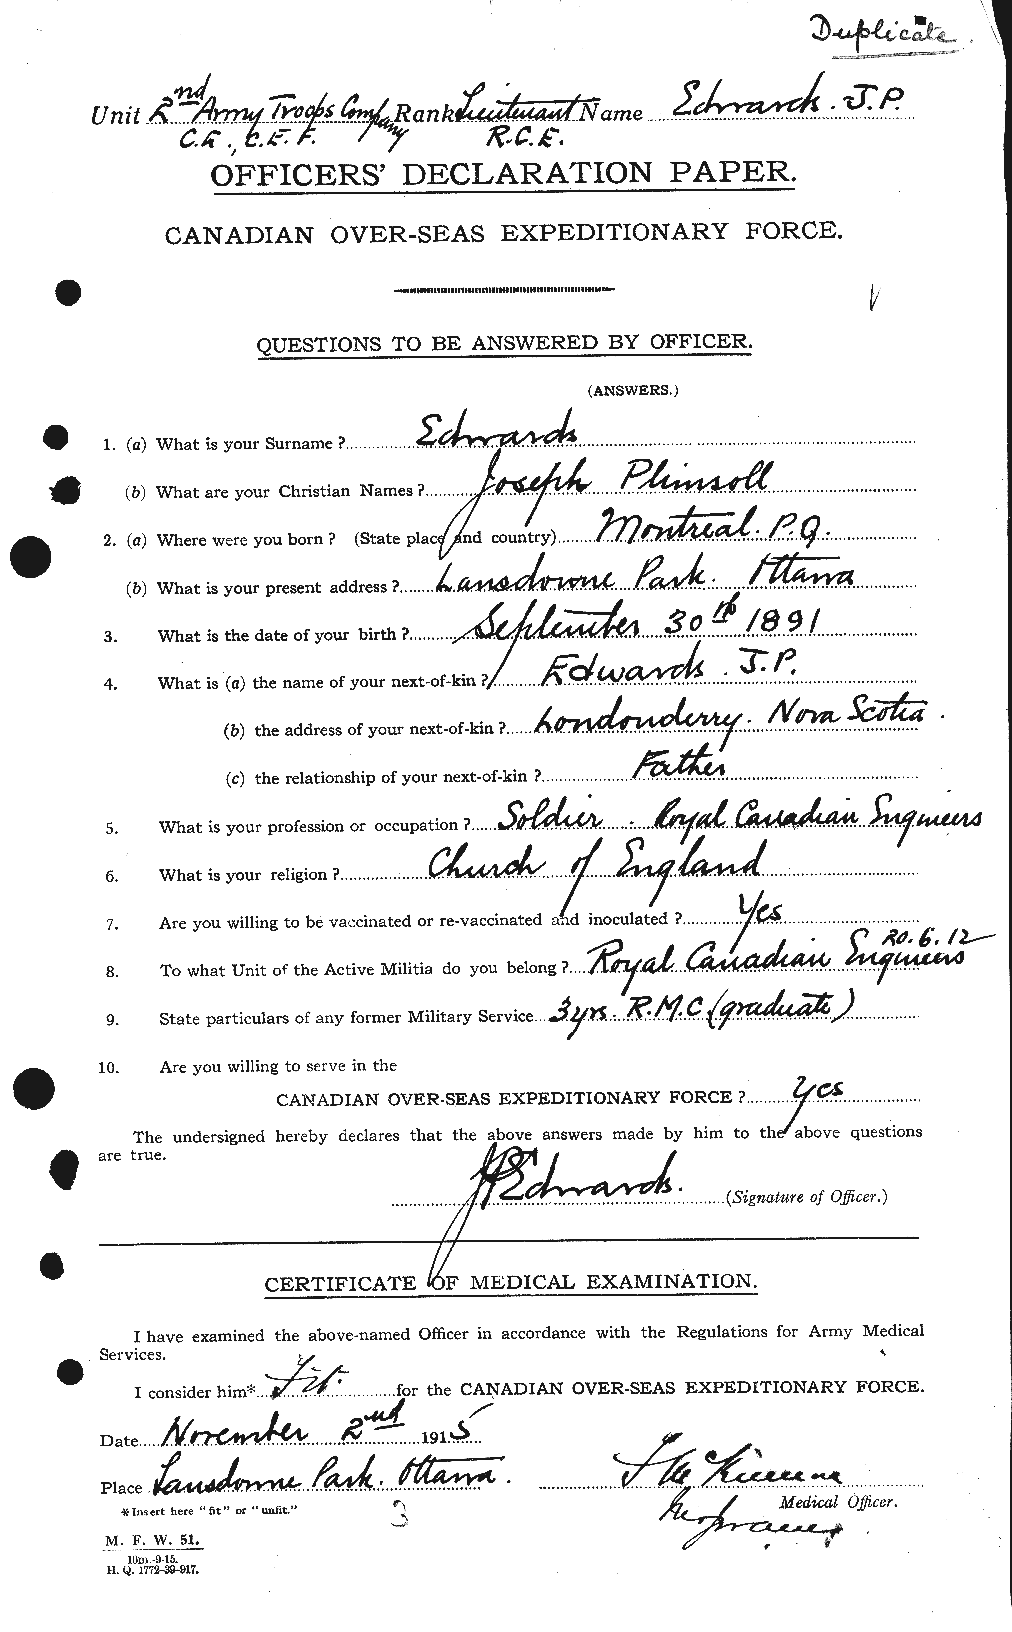 Personnel Records of the First World War - CEF 310185a